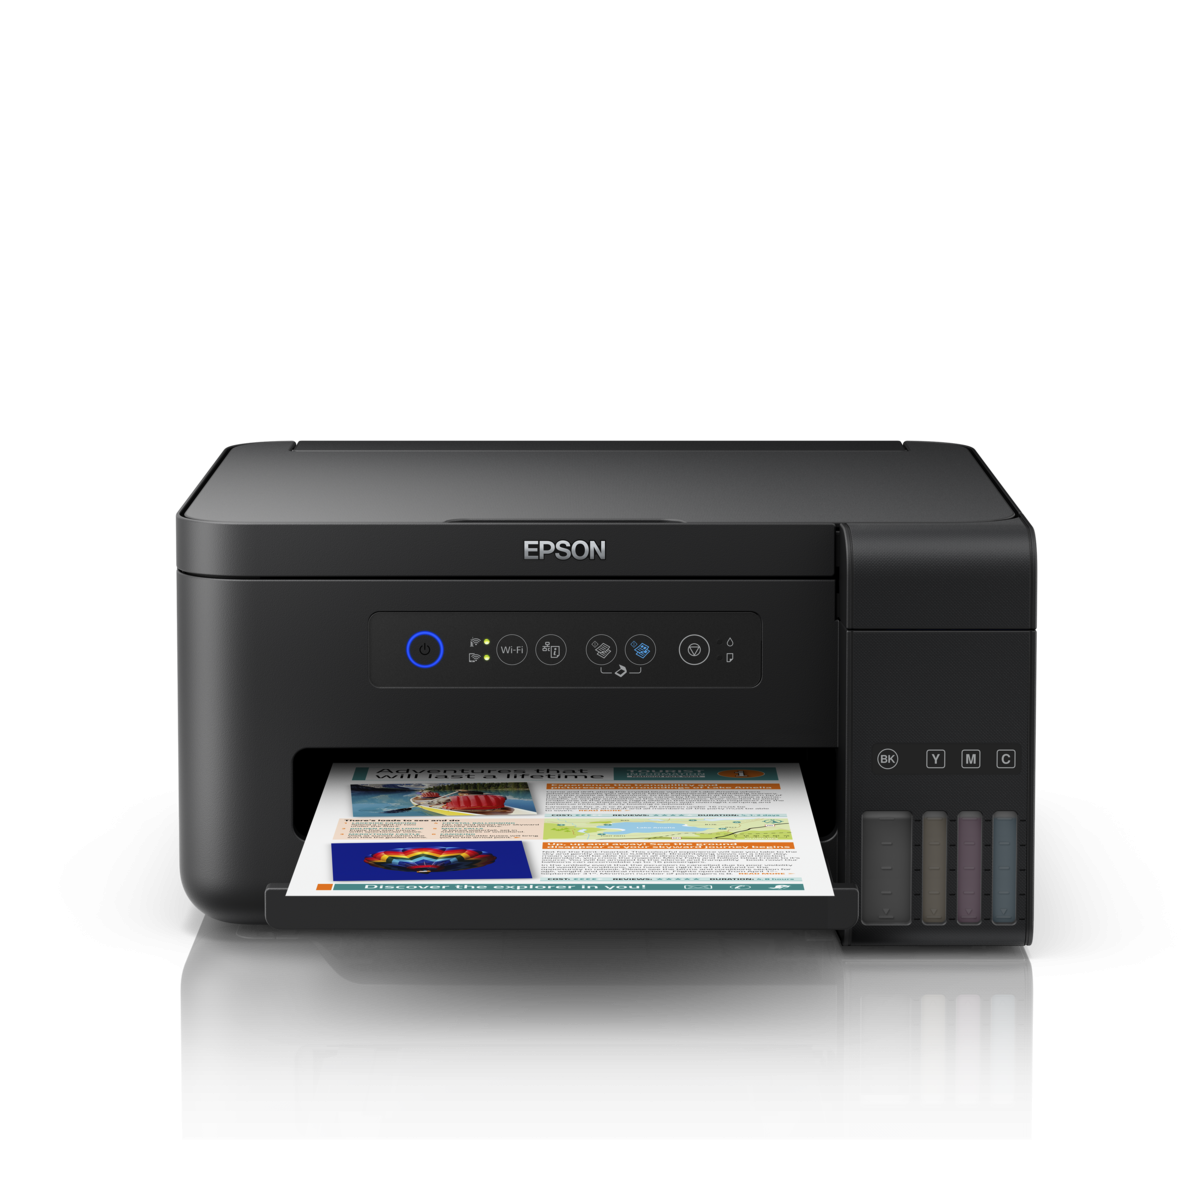 EPSON L4150 Wi-Fi All-In-One Ink Tank Printer